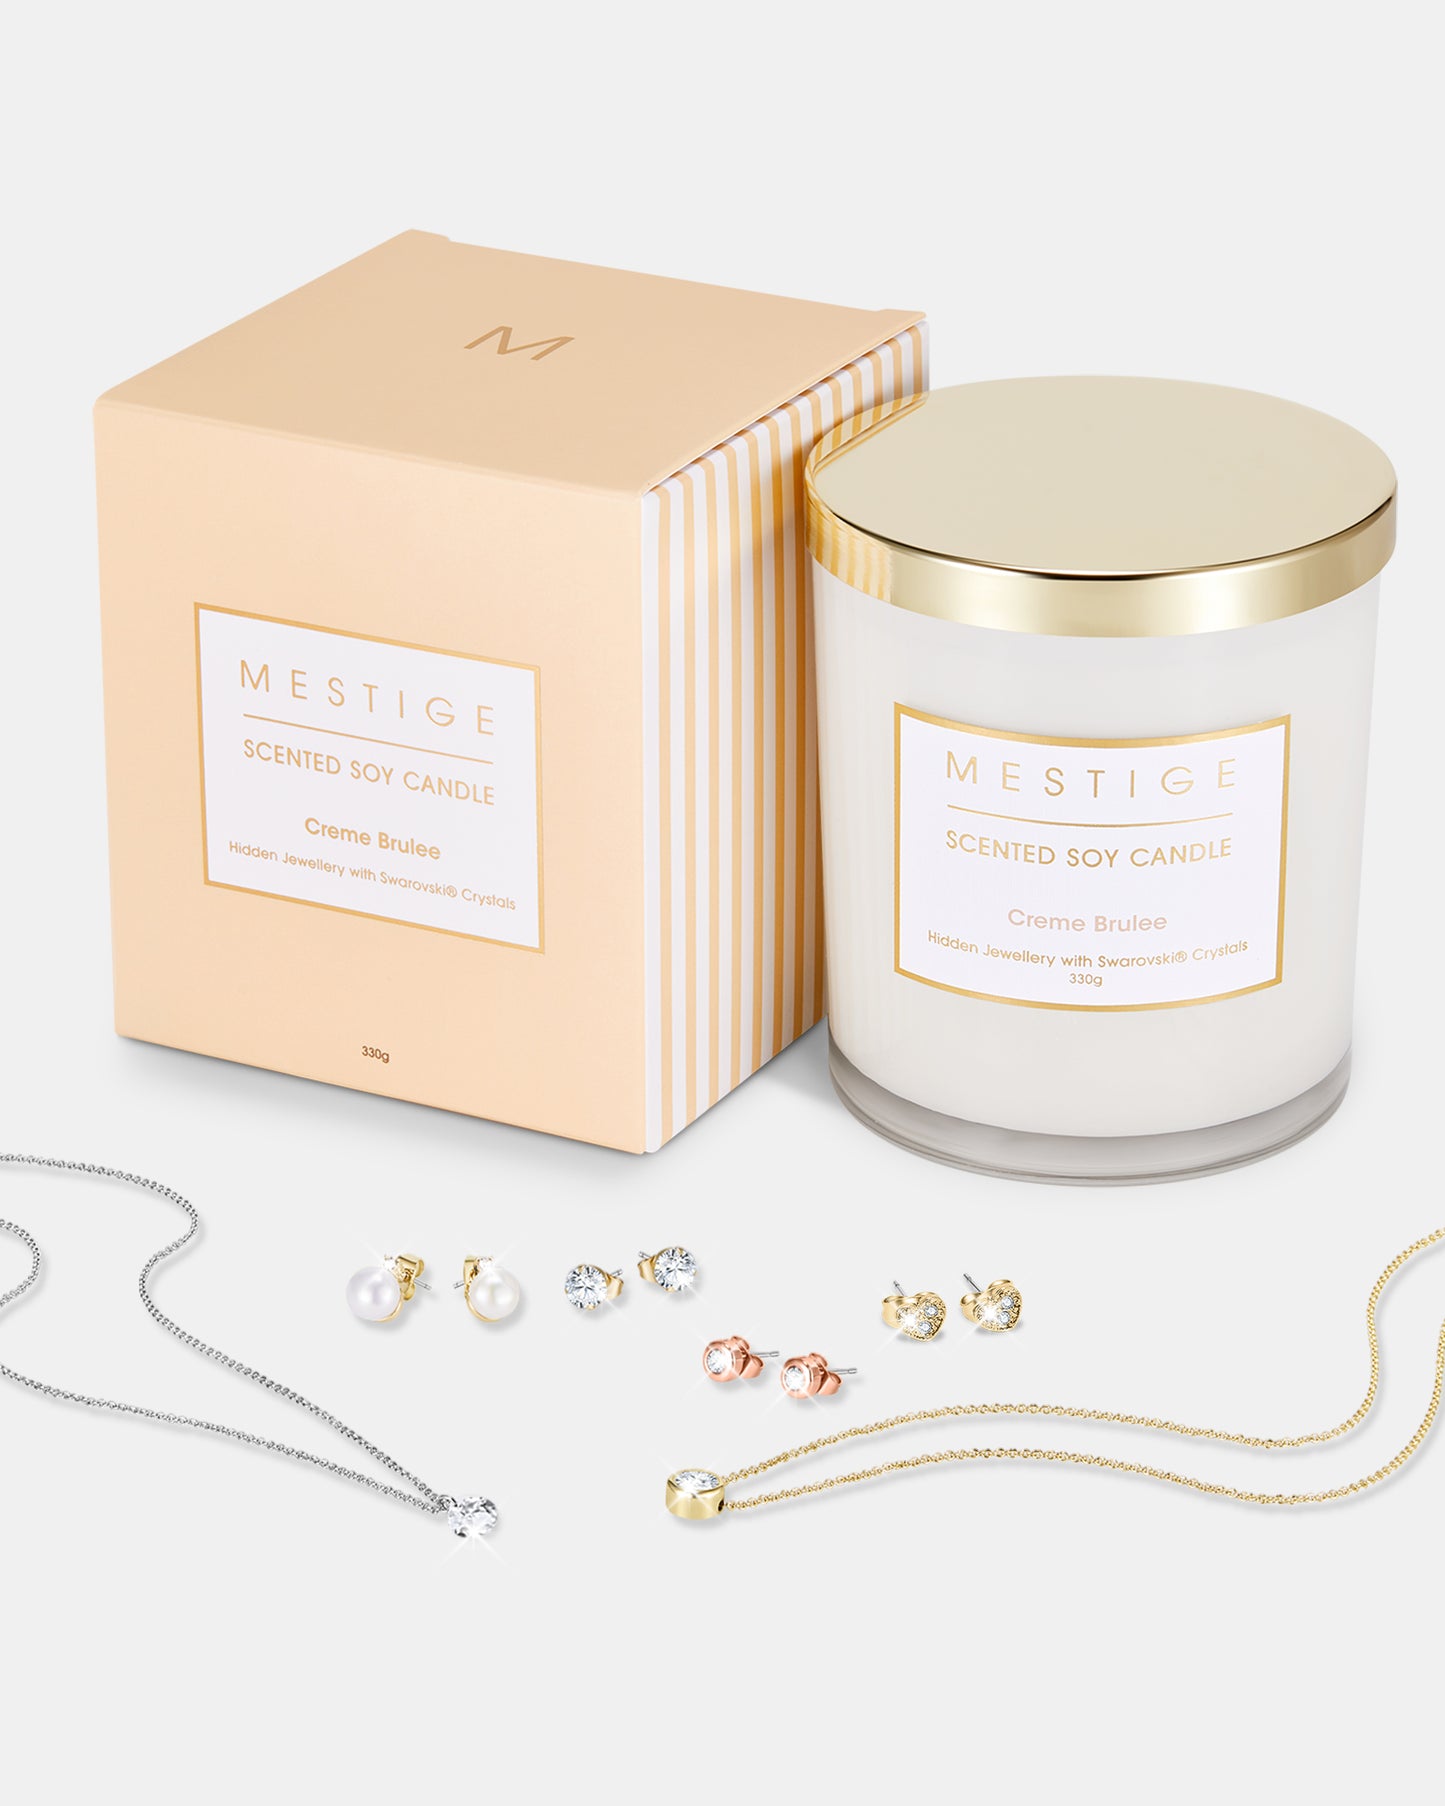 Creme Brulee Scented Candle - Hidden Crystal Jewellery